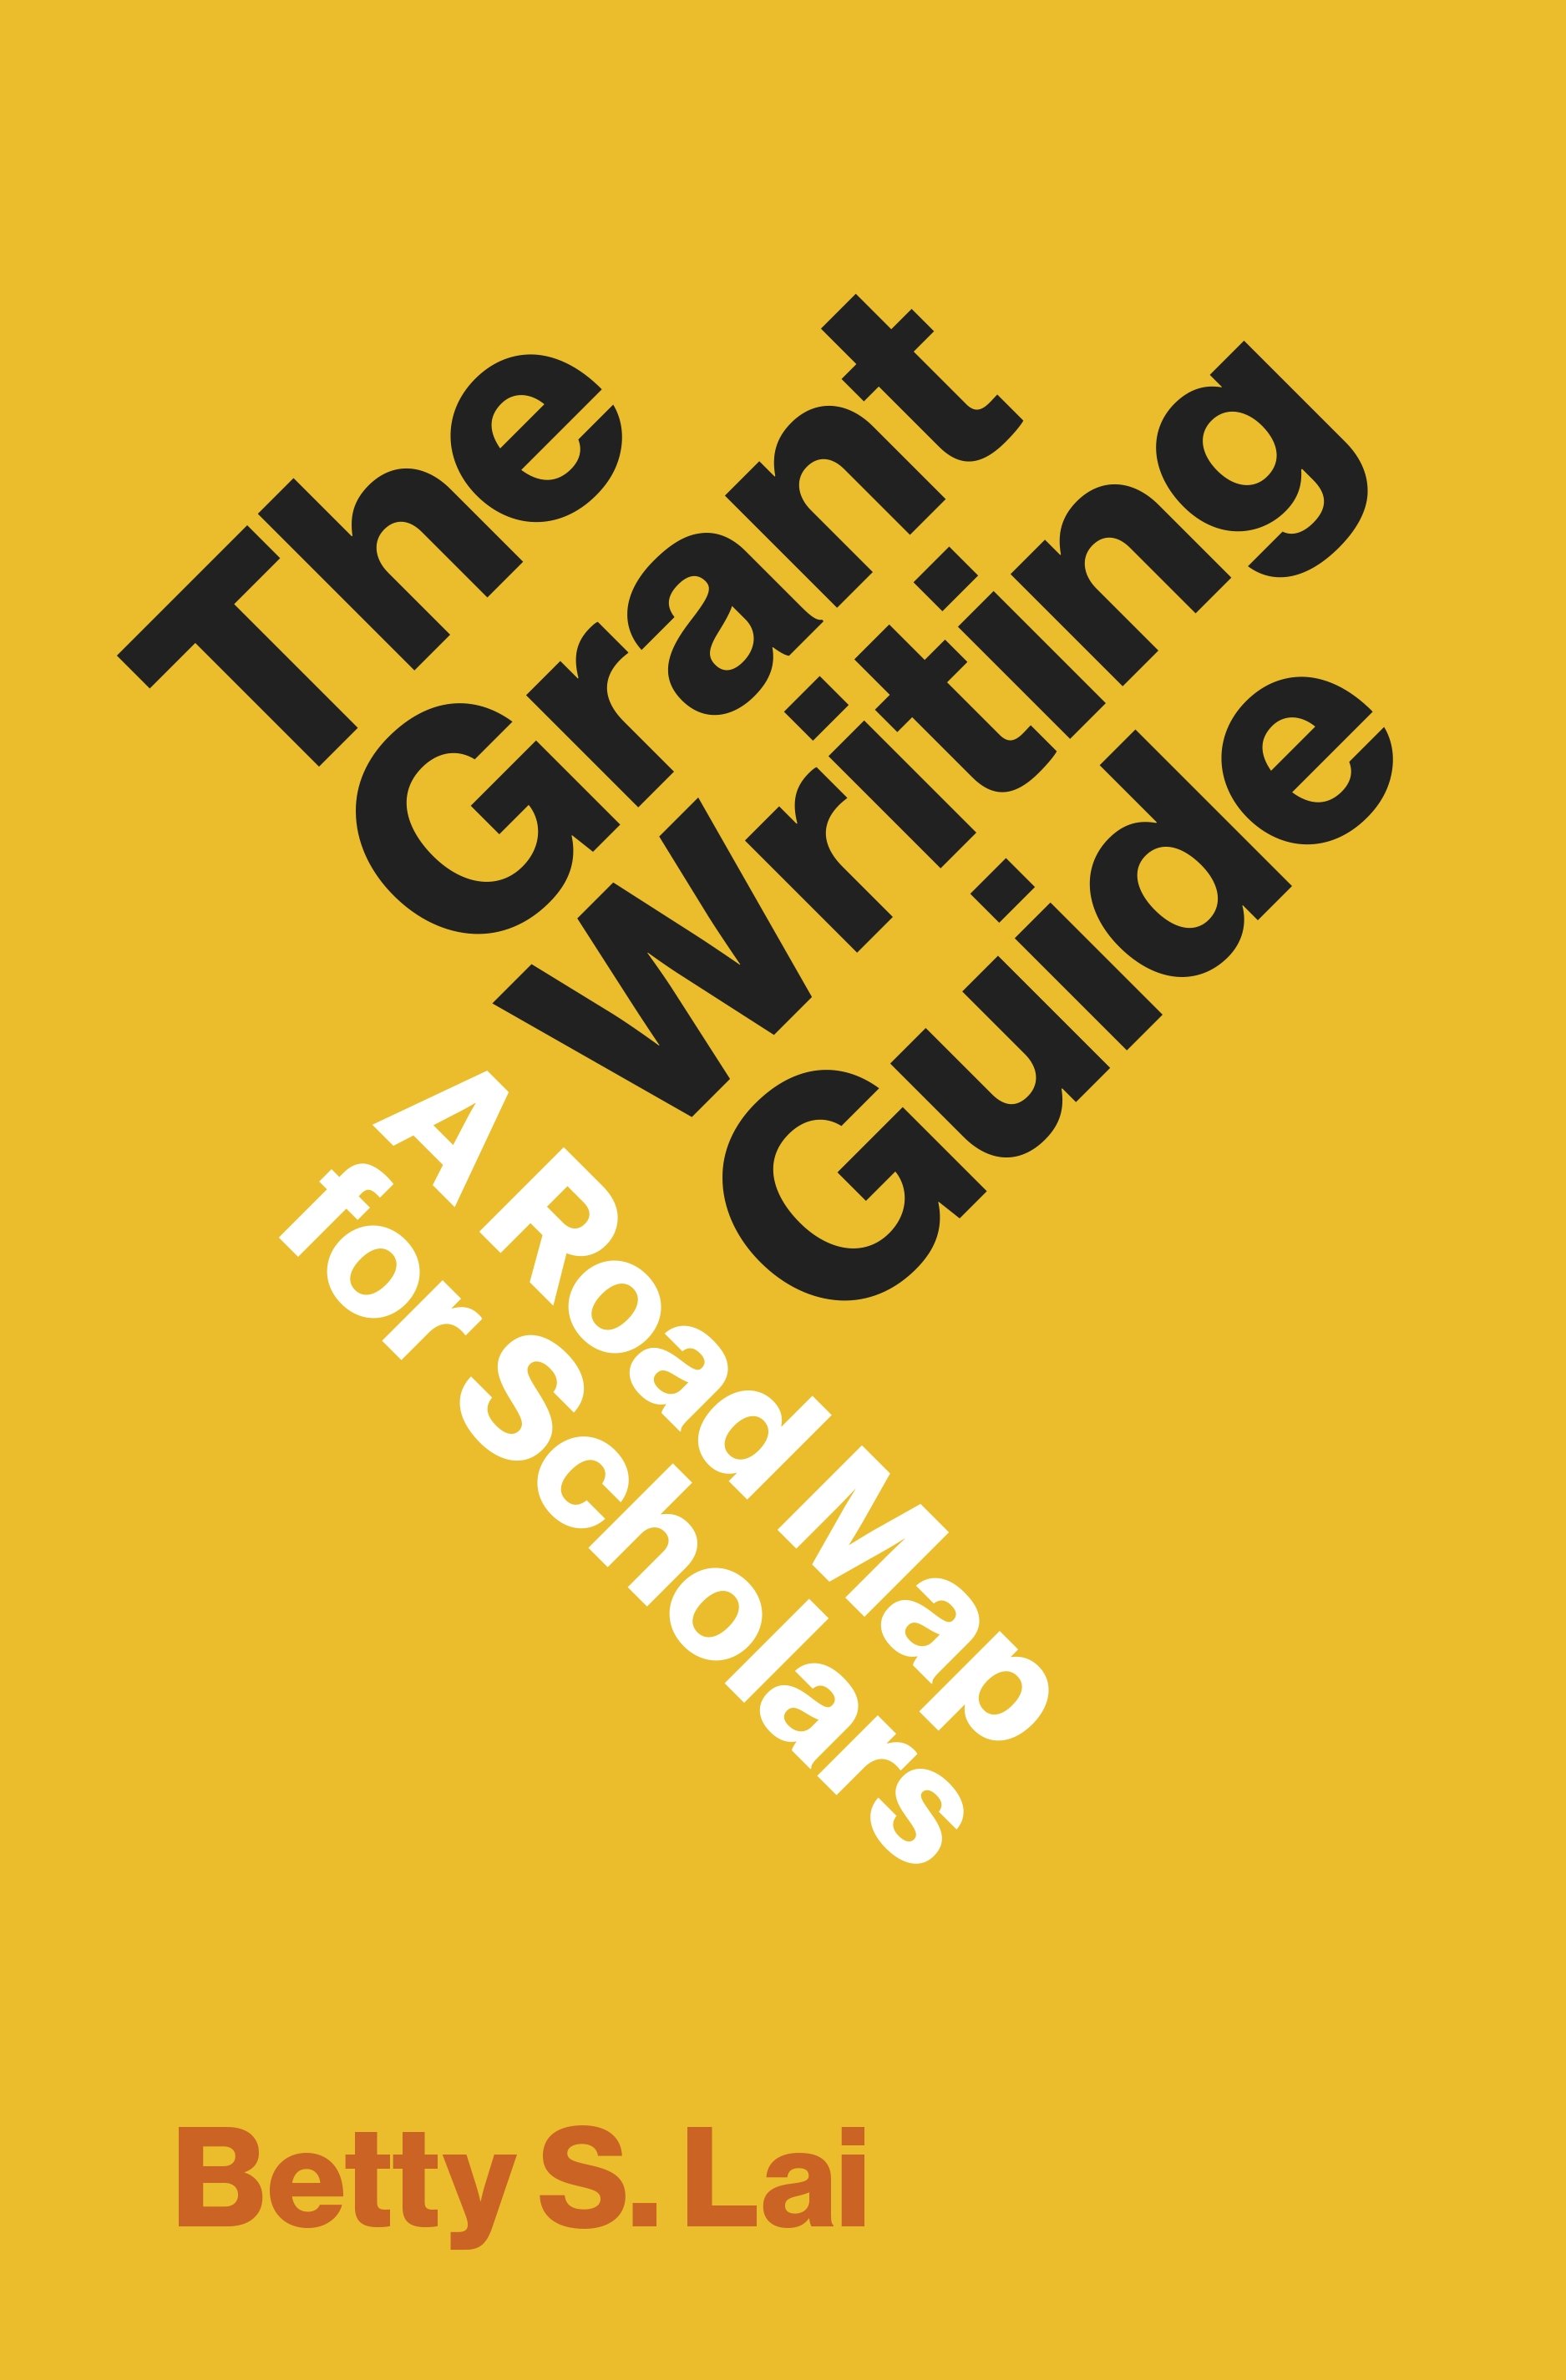 The Grant Writing Guide by Betty Lai